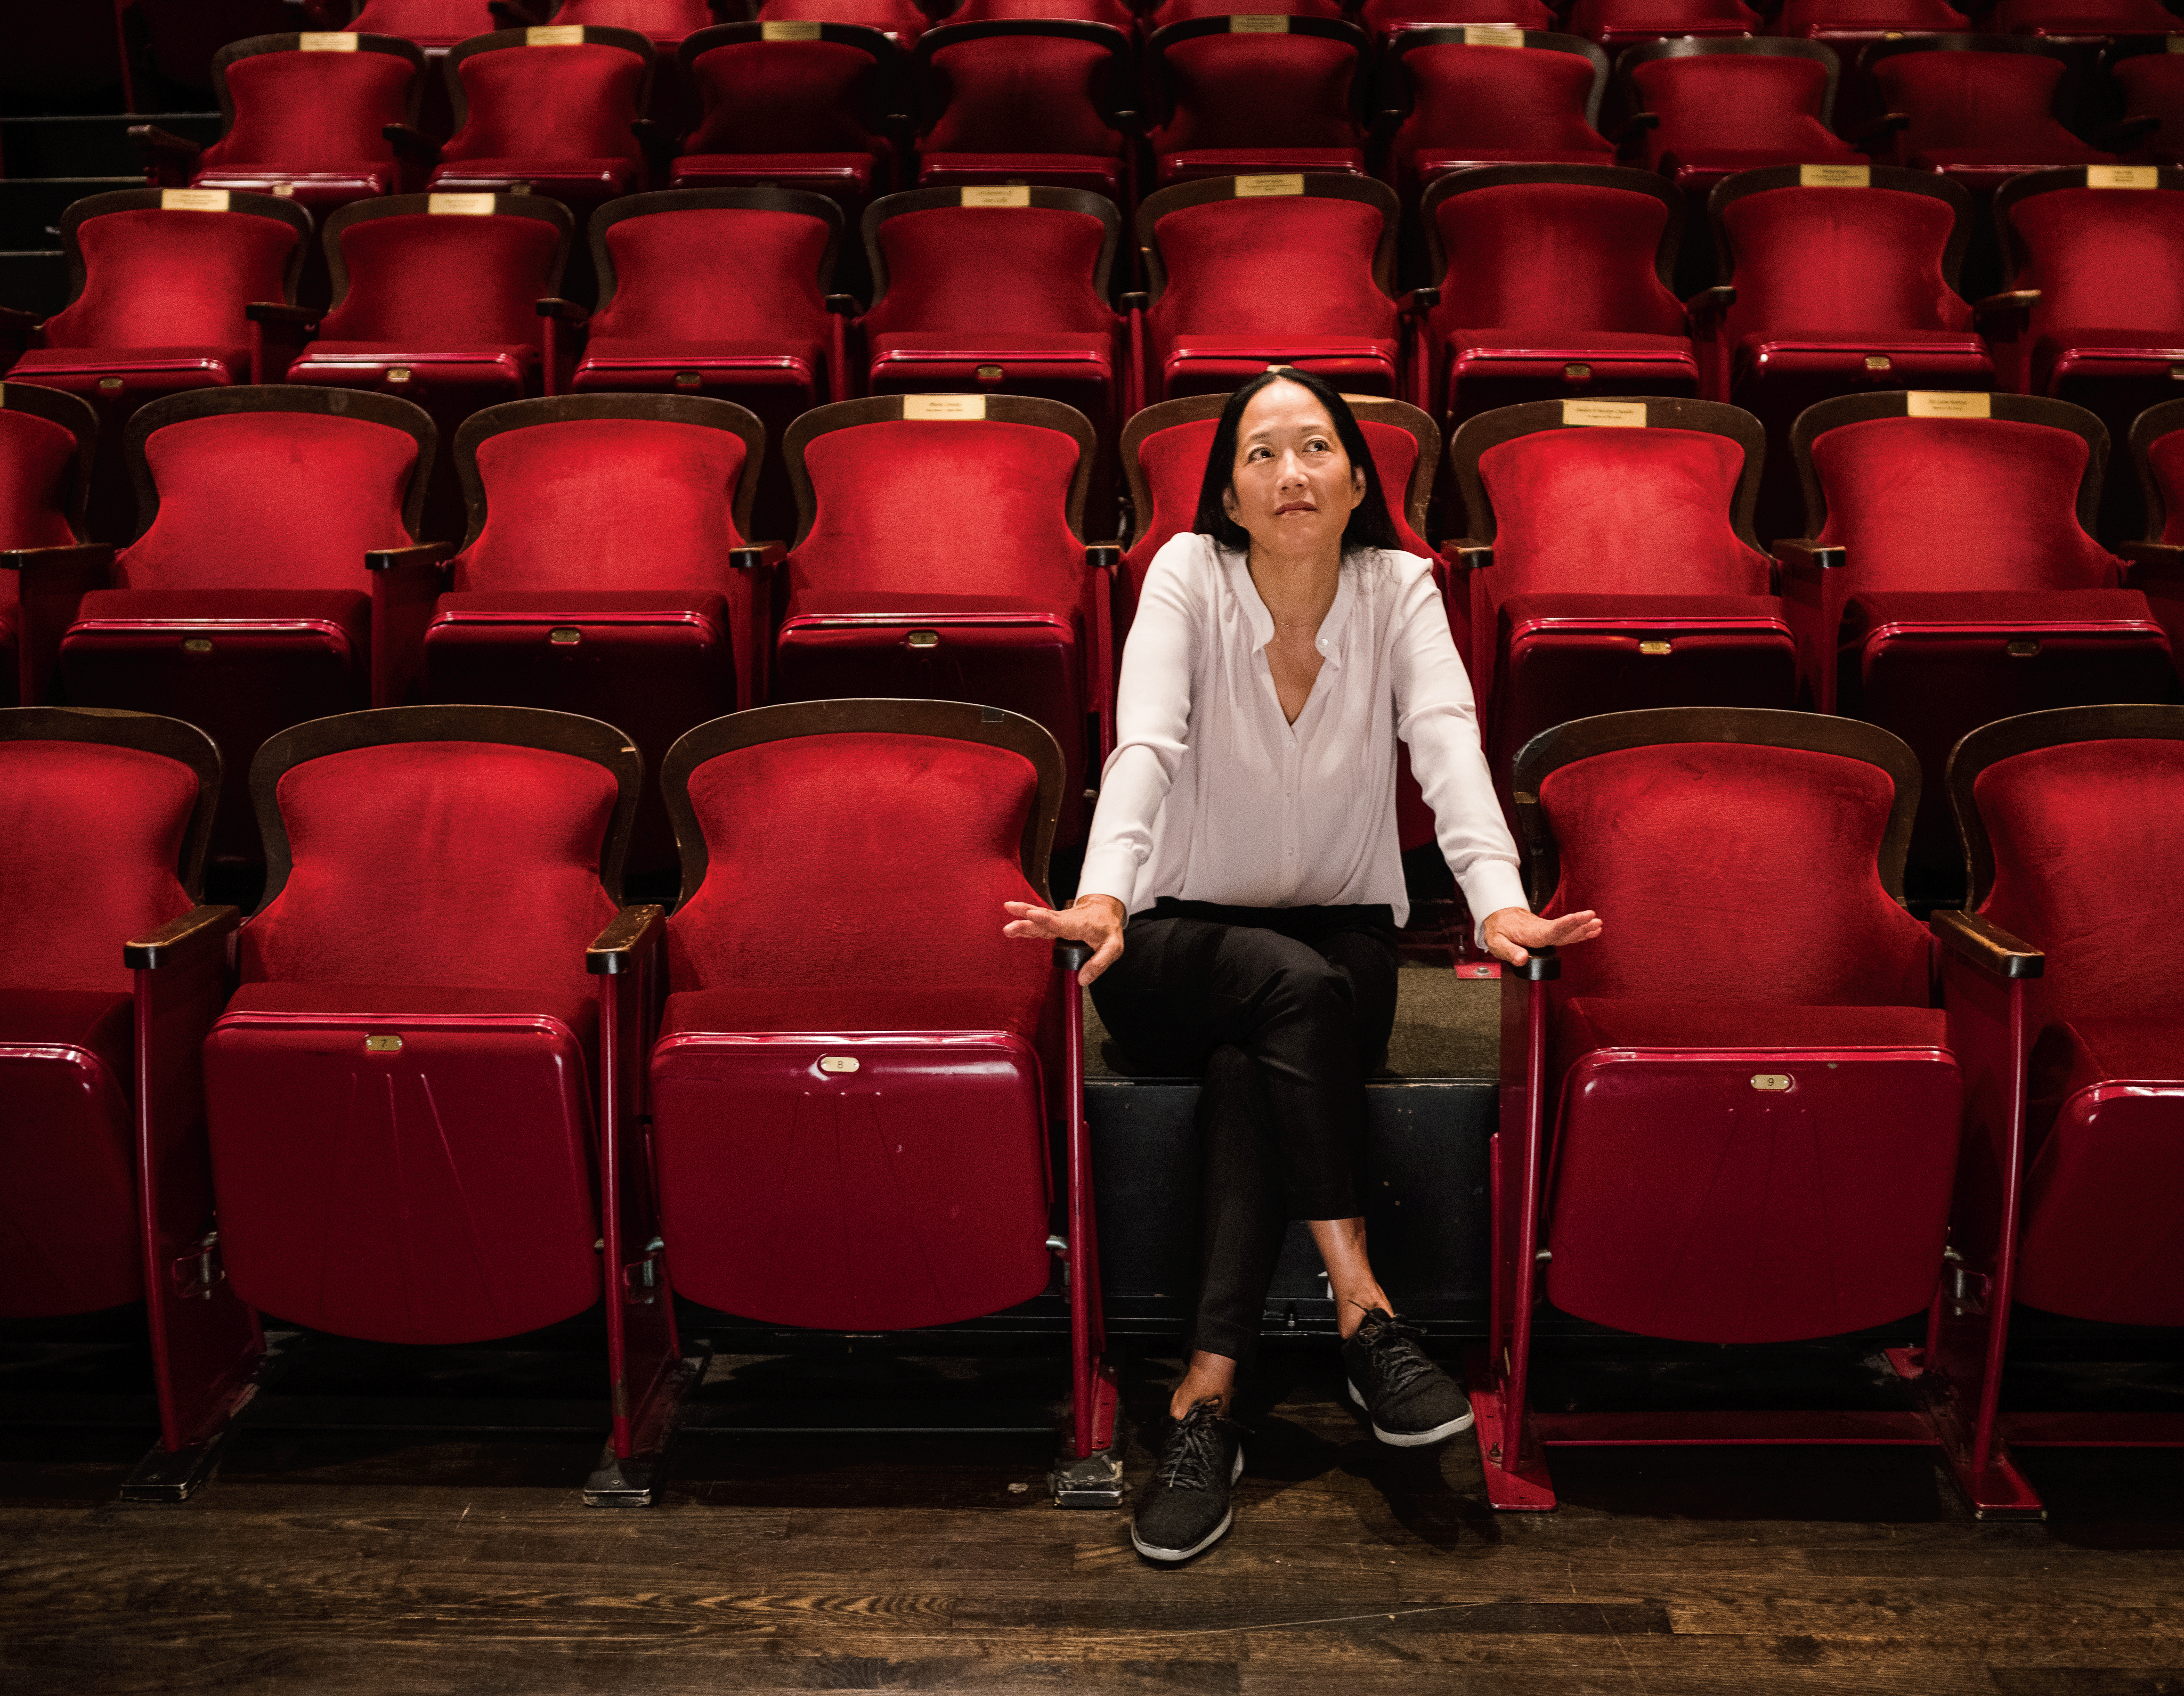 Donna Yamamoto photographed at The Cultch, the contemporary arts theatre where she has produced several plays.